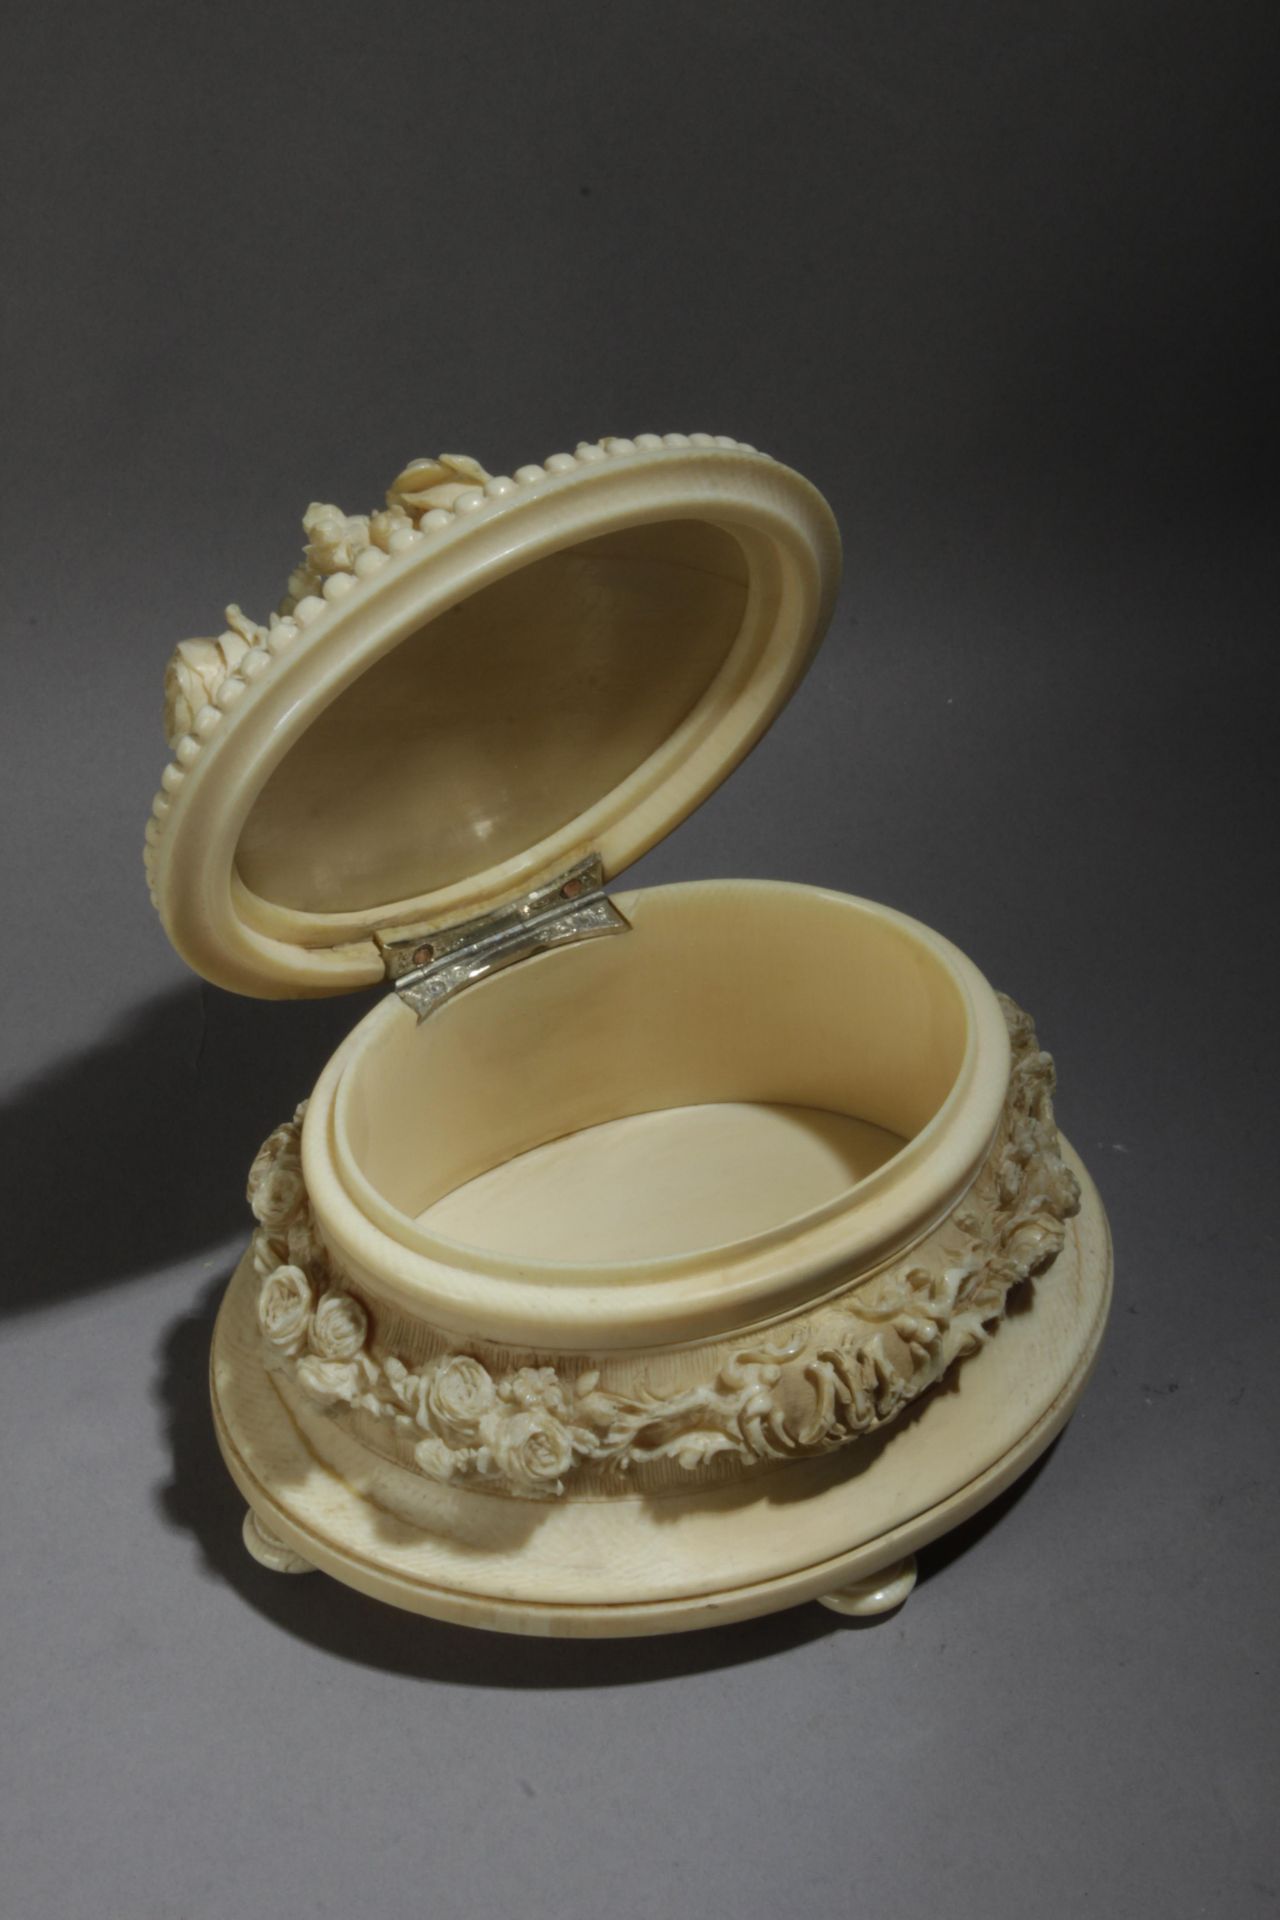 A 19th century carved ivory jewellery box from Dieppe - Image 2 of 2